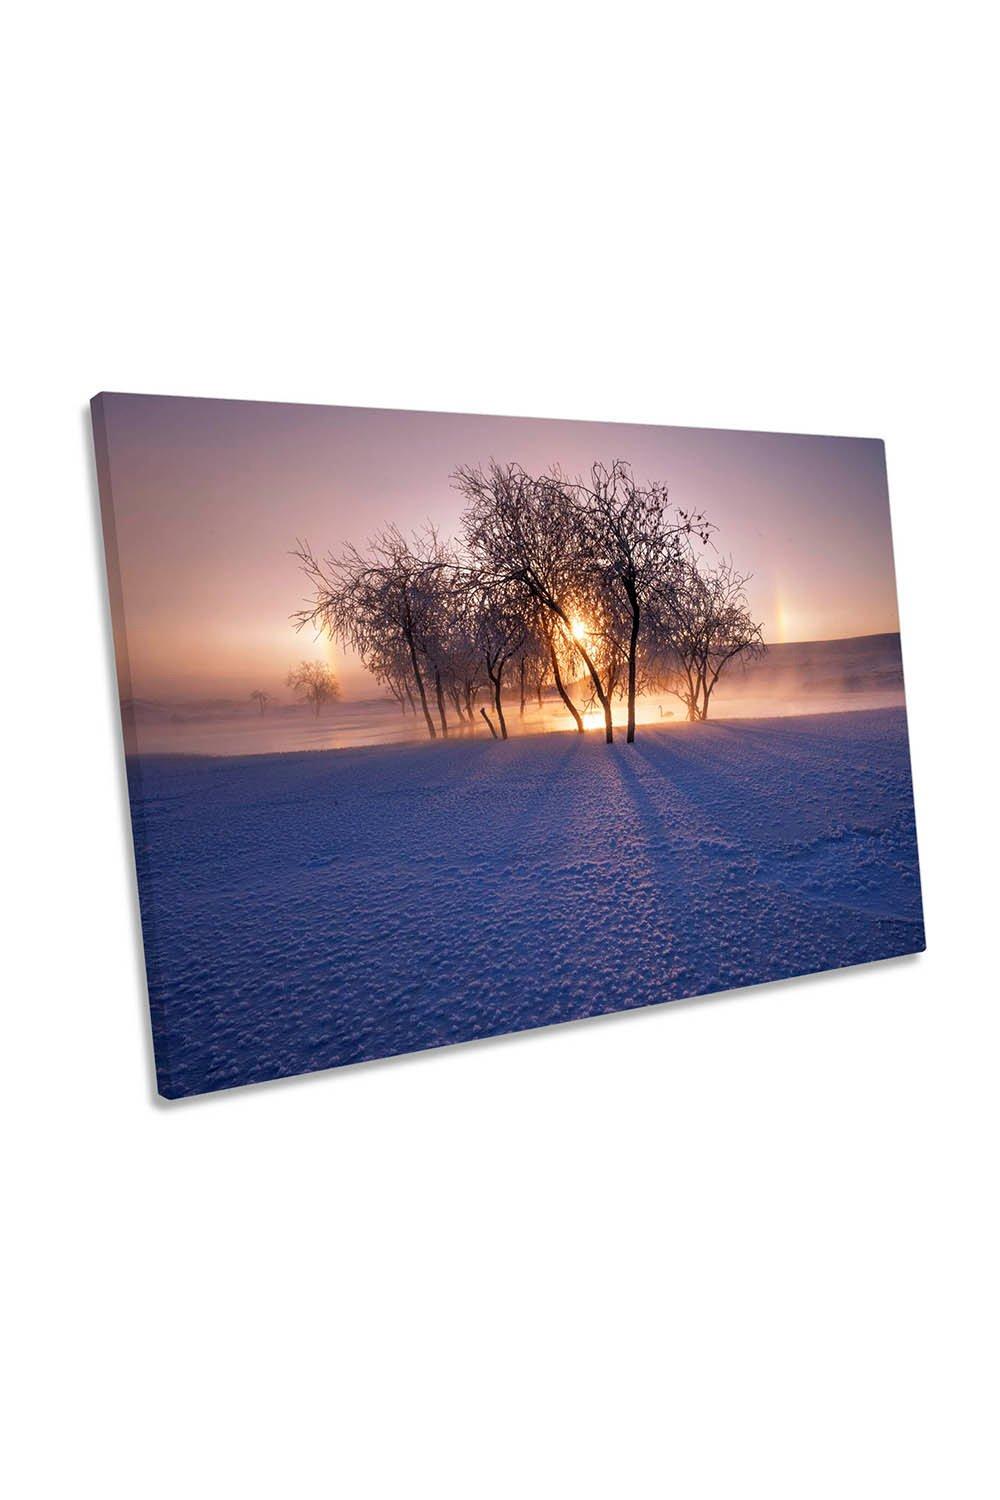 Winter Frosty Morning Sunset Lake Canvas Wall Art Picture Print